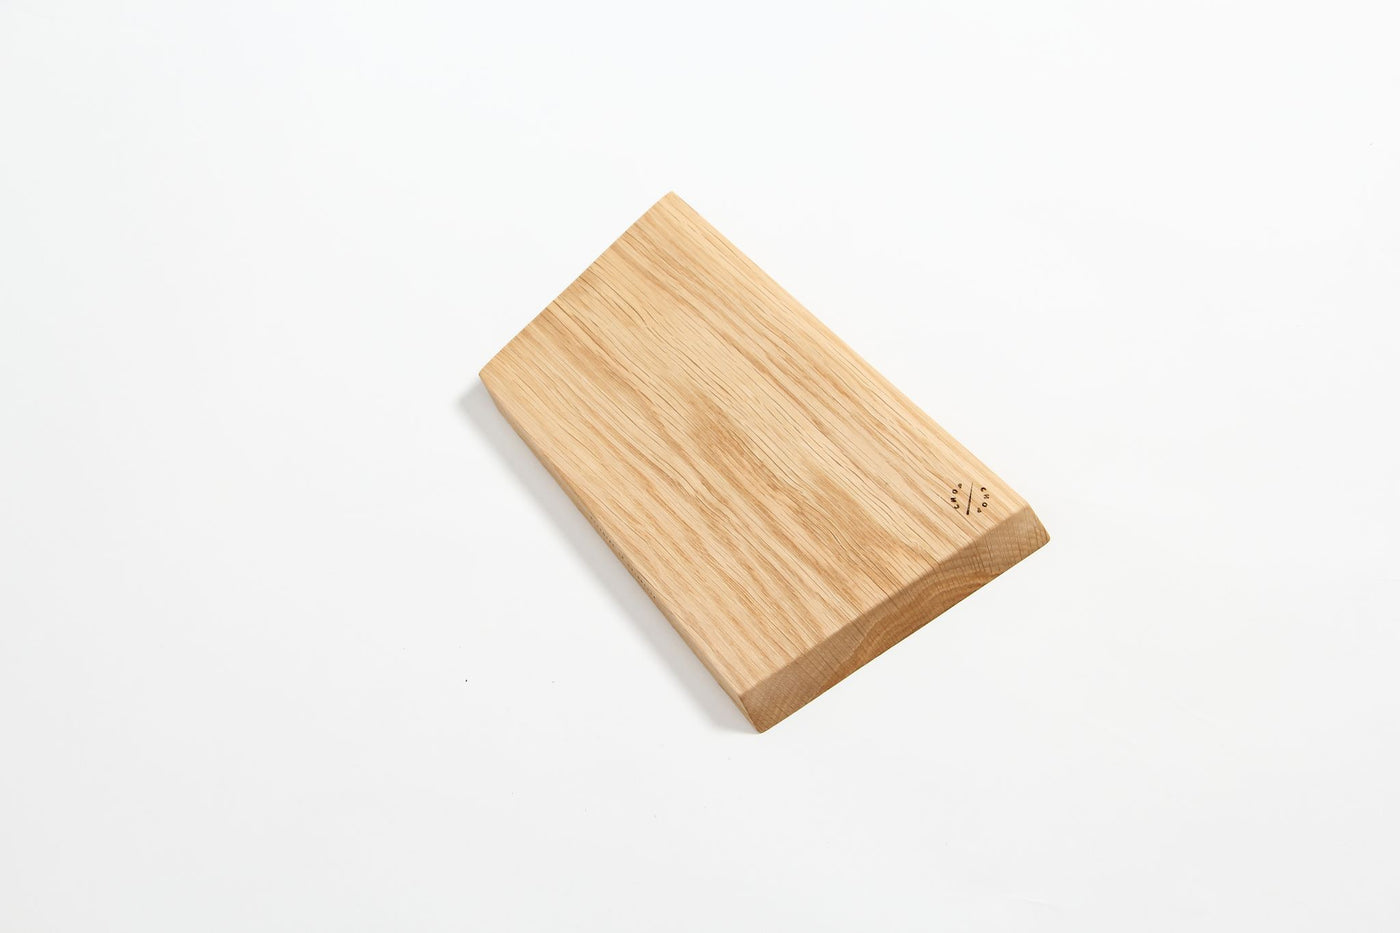 Asymmetric Mini Cutting Board-Home Goods-TRAYS / BOARDS-Forest Homes-Nature inspired decor-Nature decor